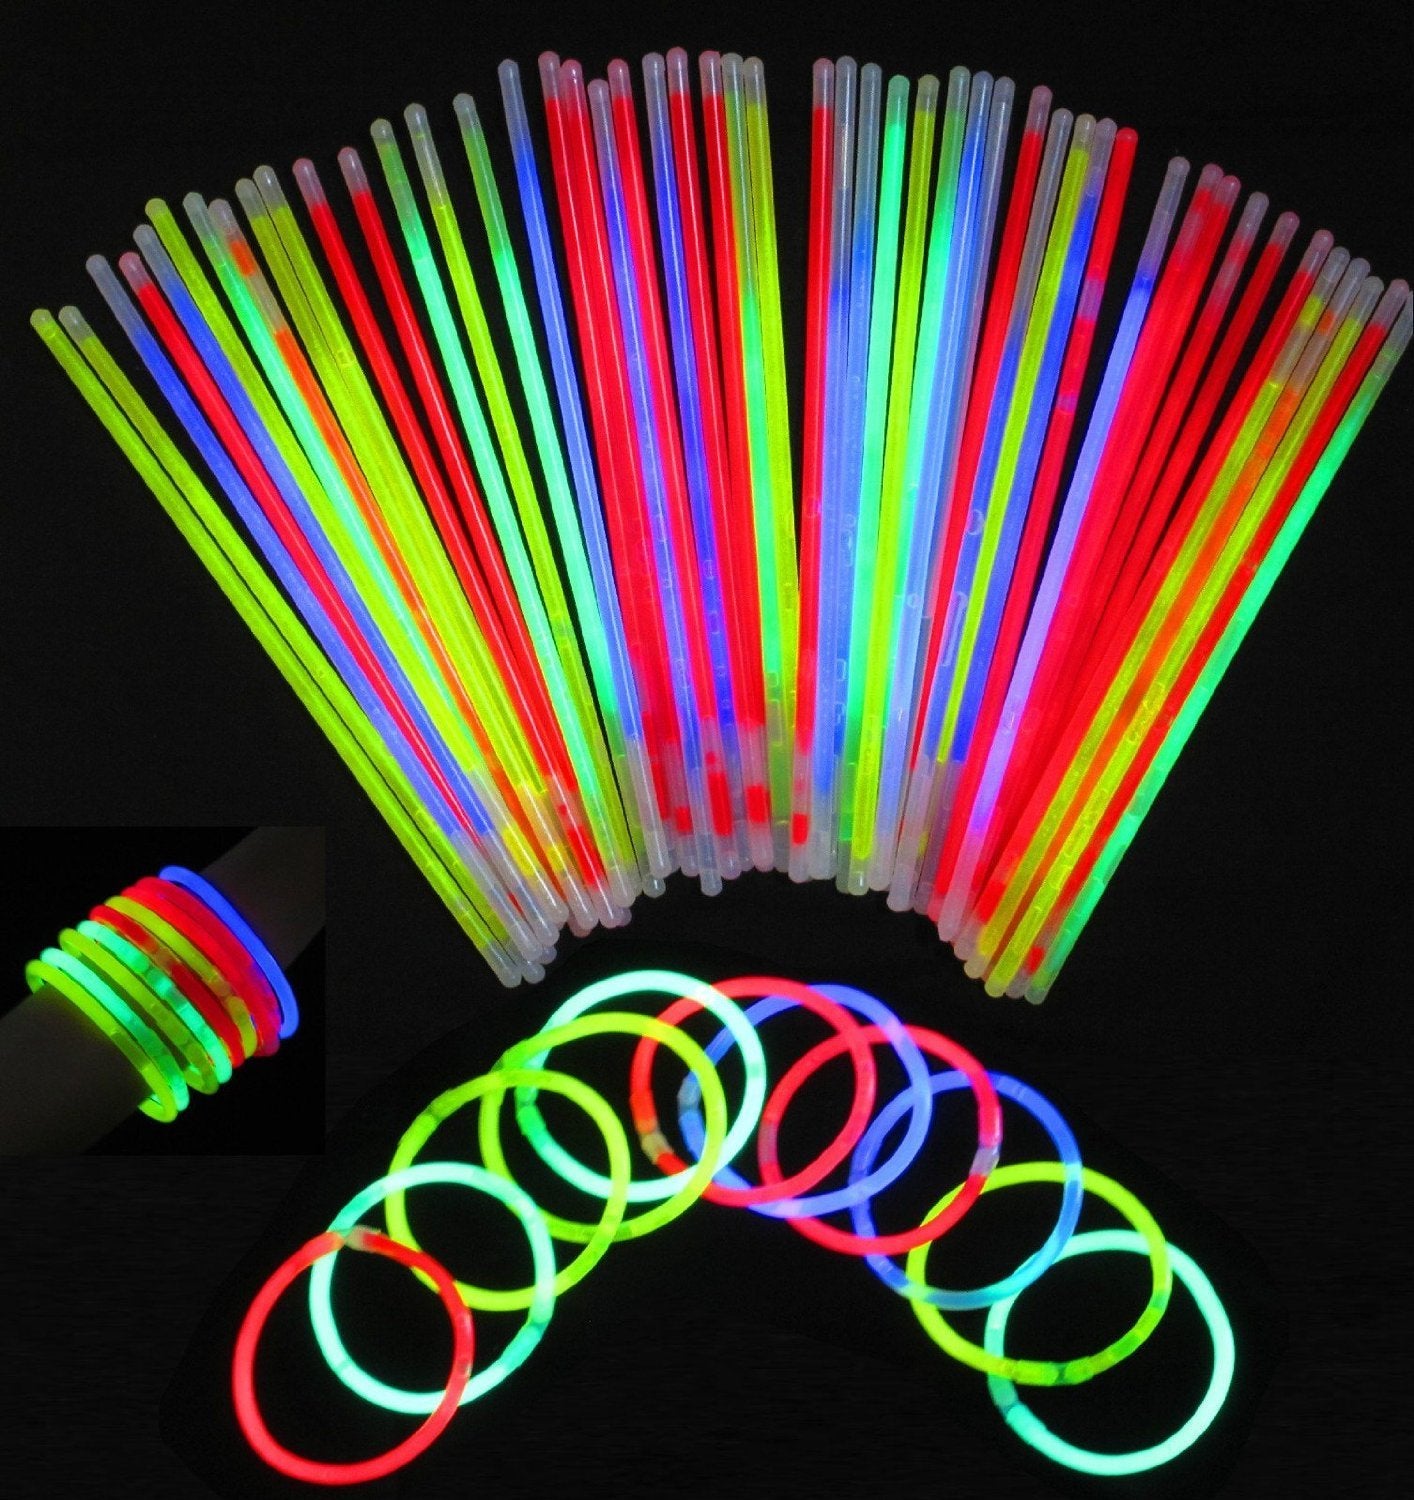 Vivii Glowsticks, 100 Light up Toys Glow Stick Bracelets Mixed Colors Party Favors Supplies (Tube of 100)